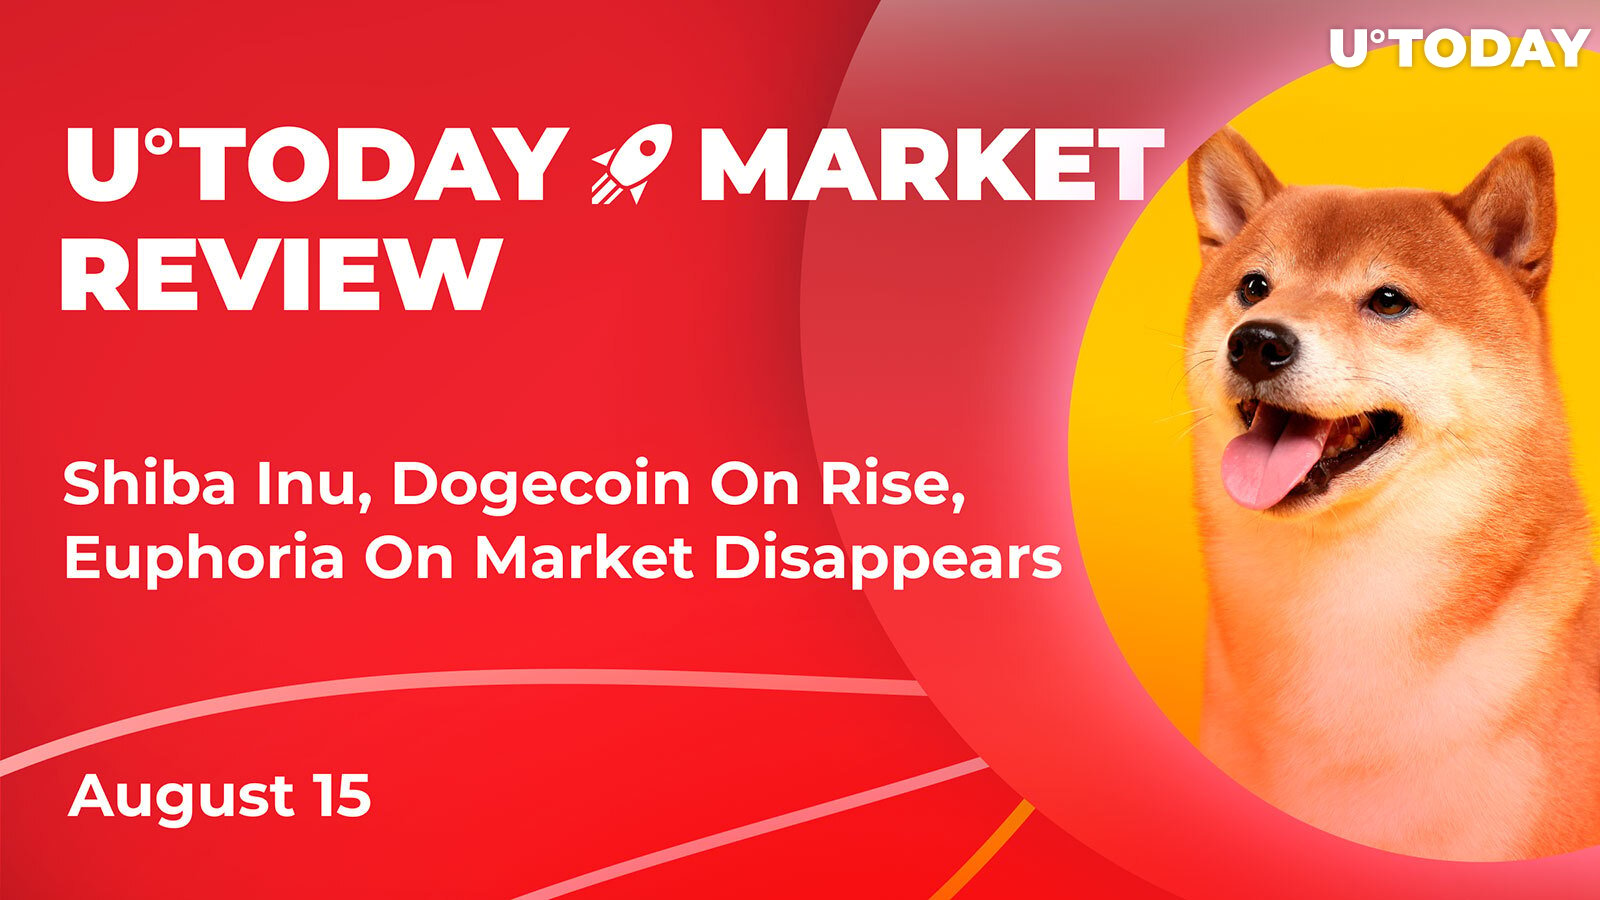 Shiba Inu, Dogecoin On Rise While Euphoria On Market Disappears: Crypto Market Review, August 15